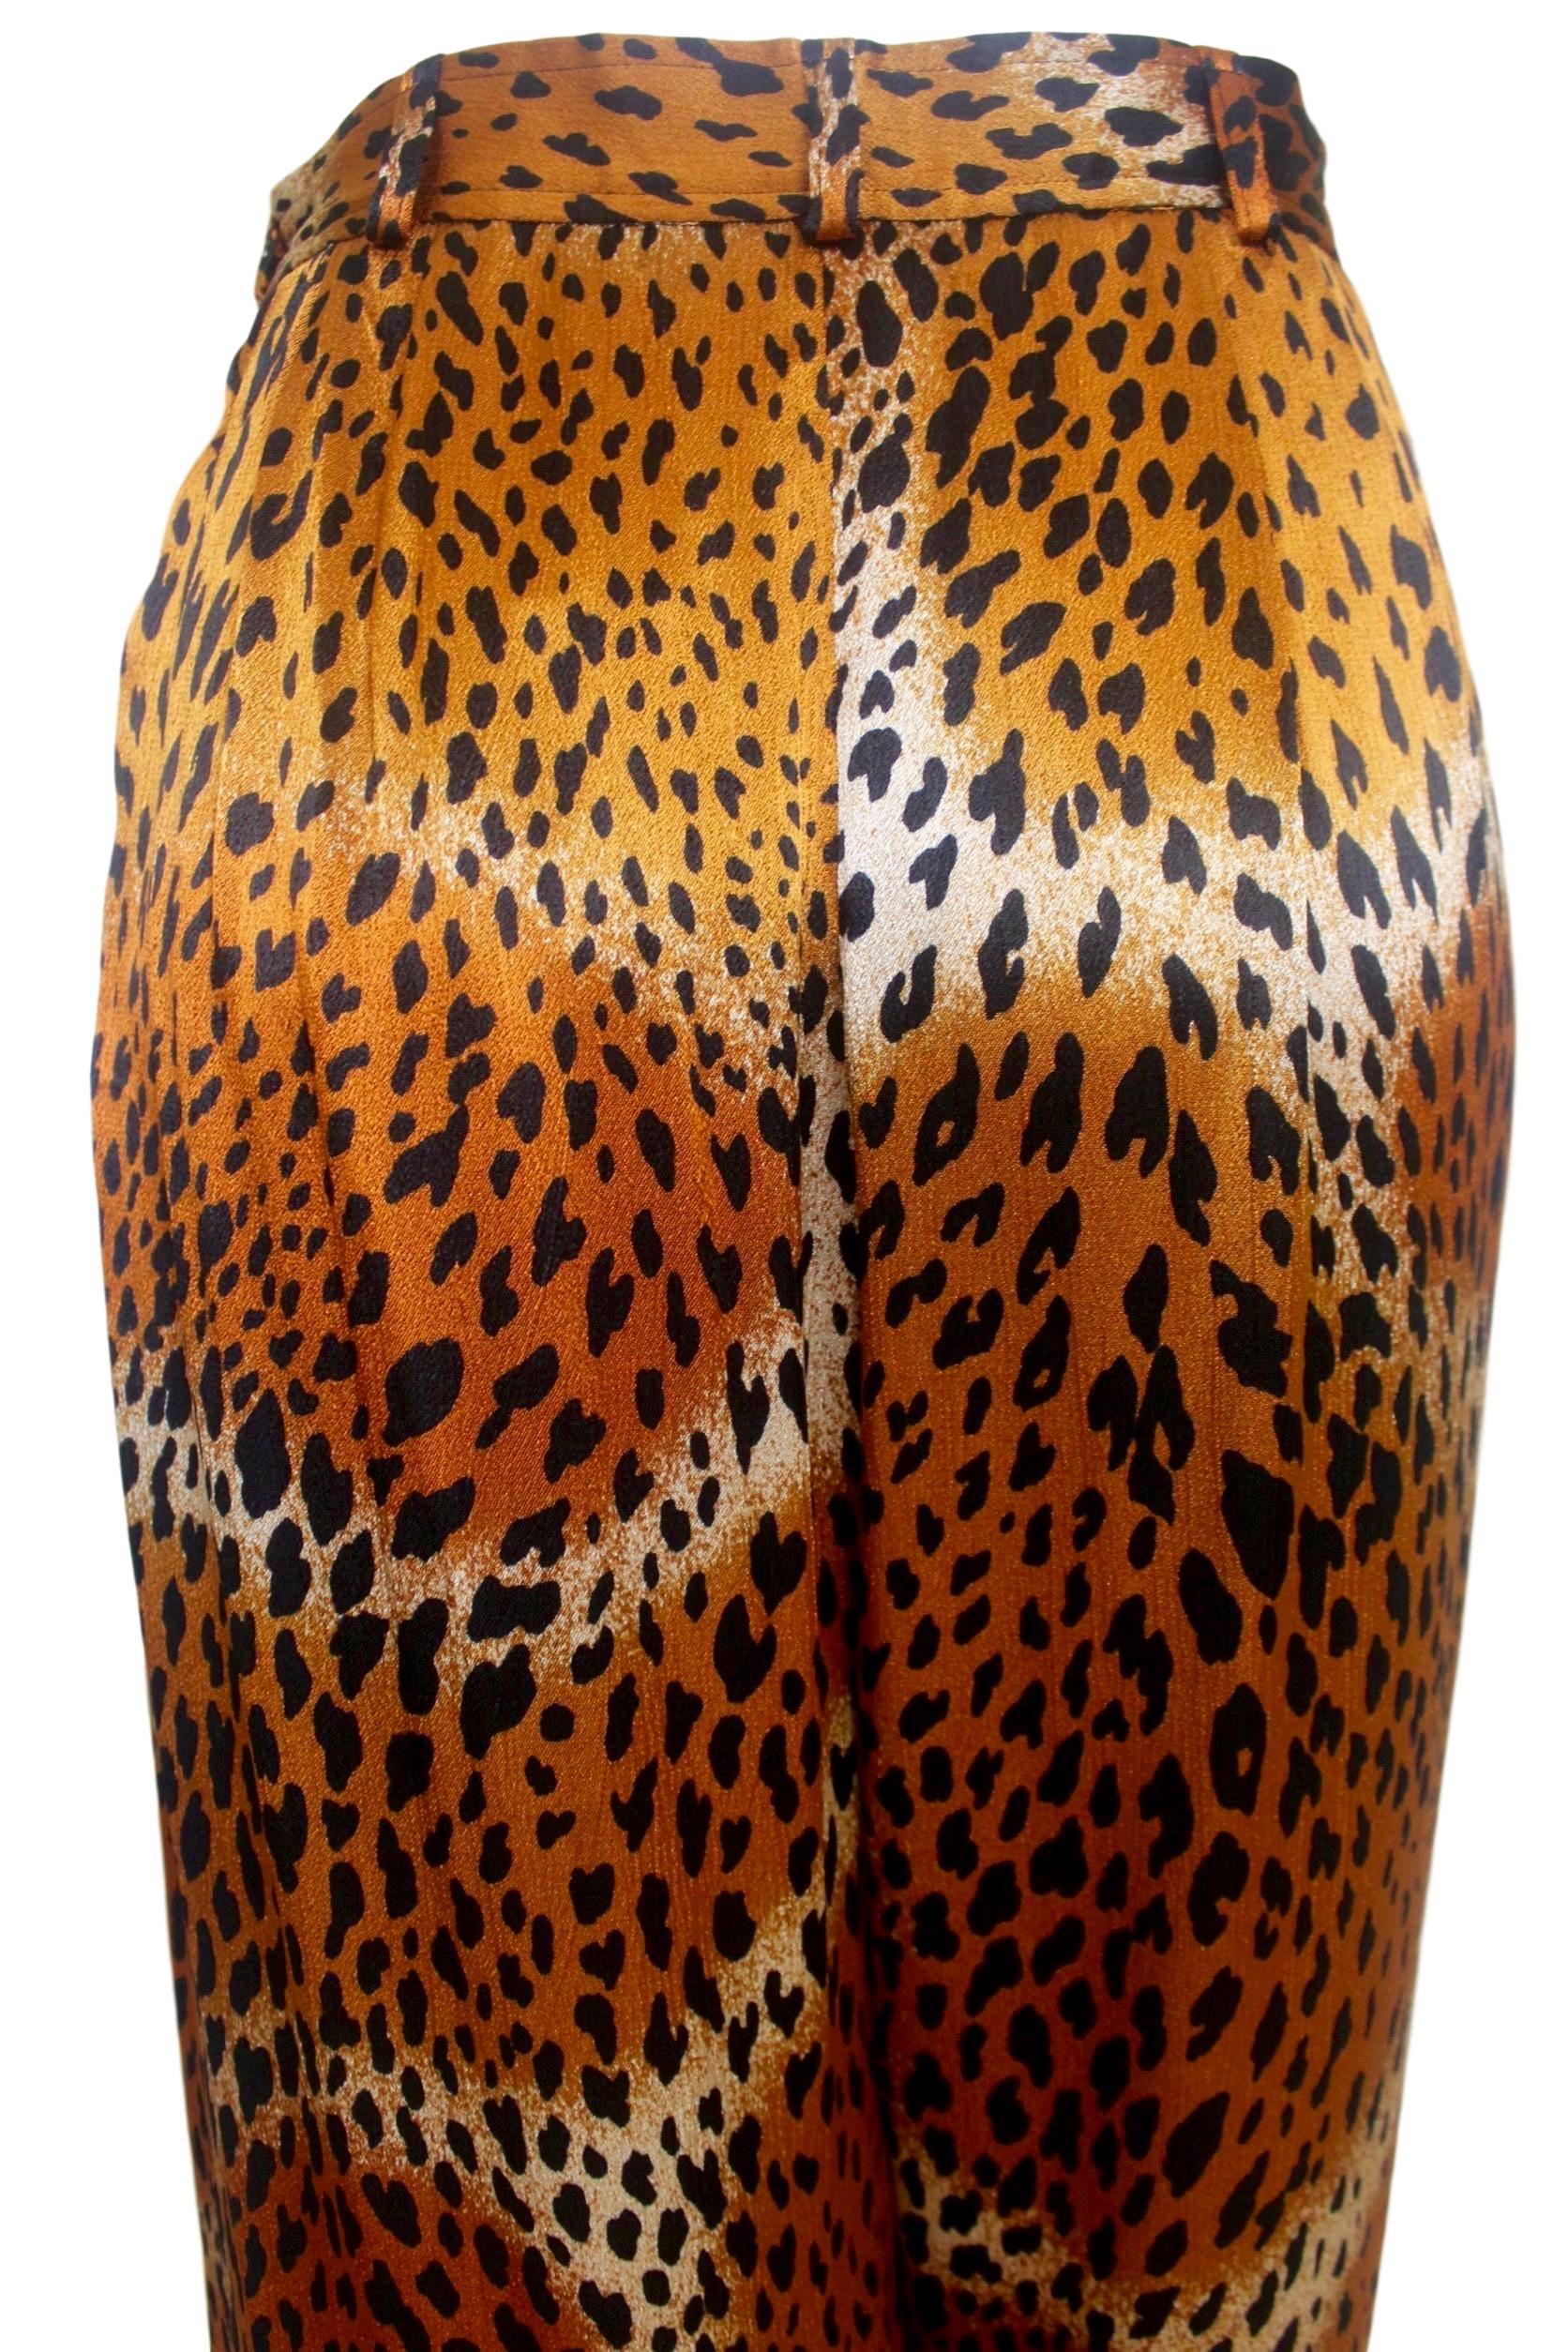 Yves Saint Laurent 1977 Leopard Print Camisole and Trousers In Excellent Condition For Sale In Bath, GB